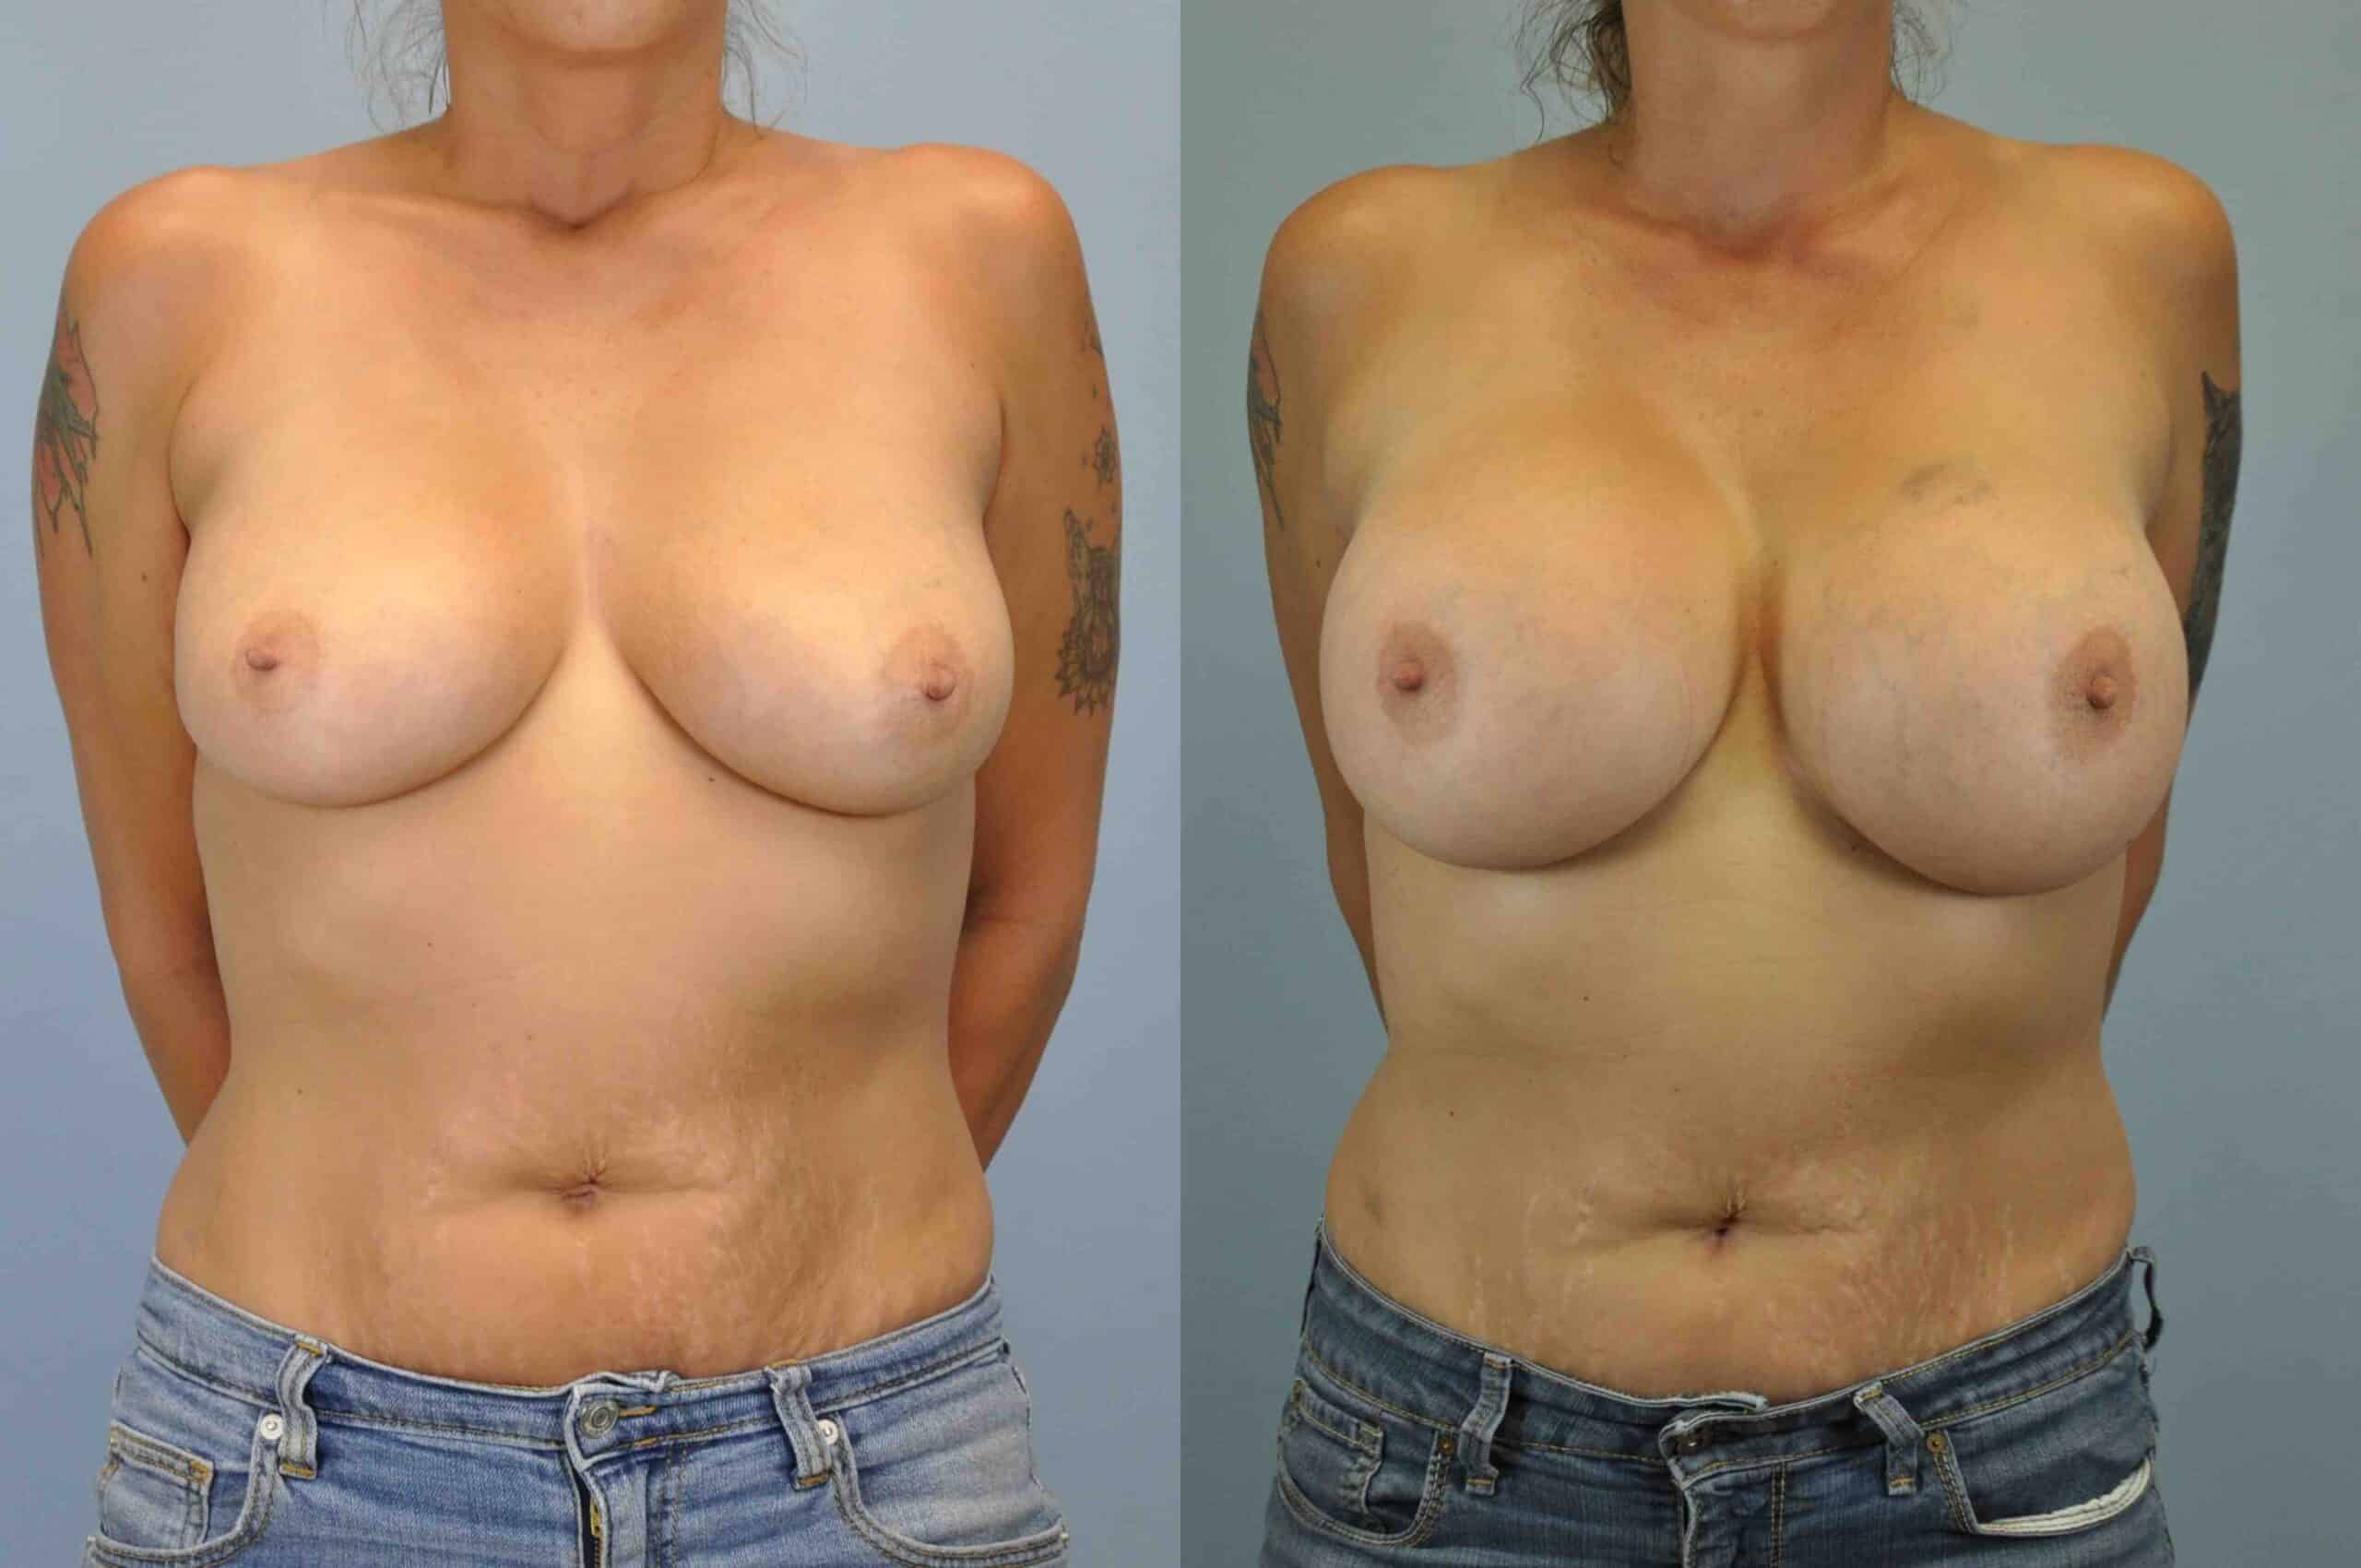 Before and after, patient 2 yr post op from breast augmentation and level III muscle release procedures performed by Dr. Paul Vanek